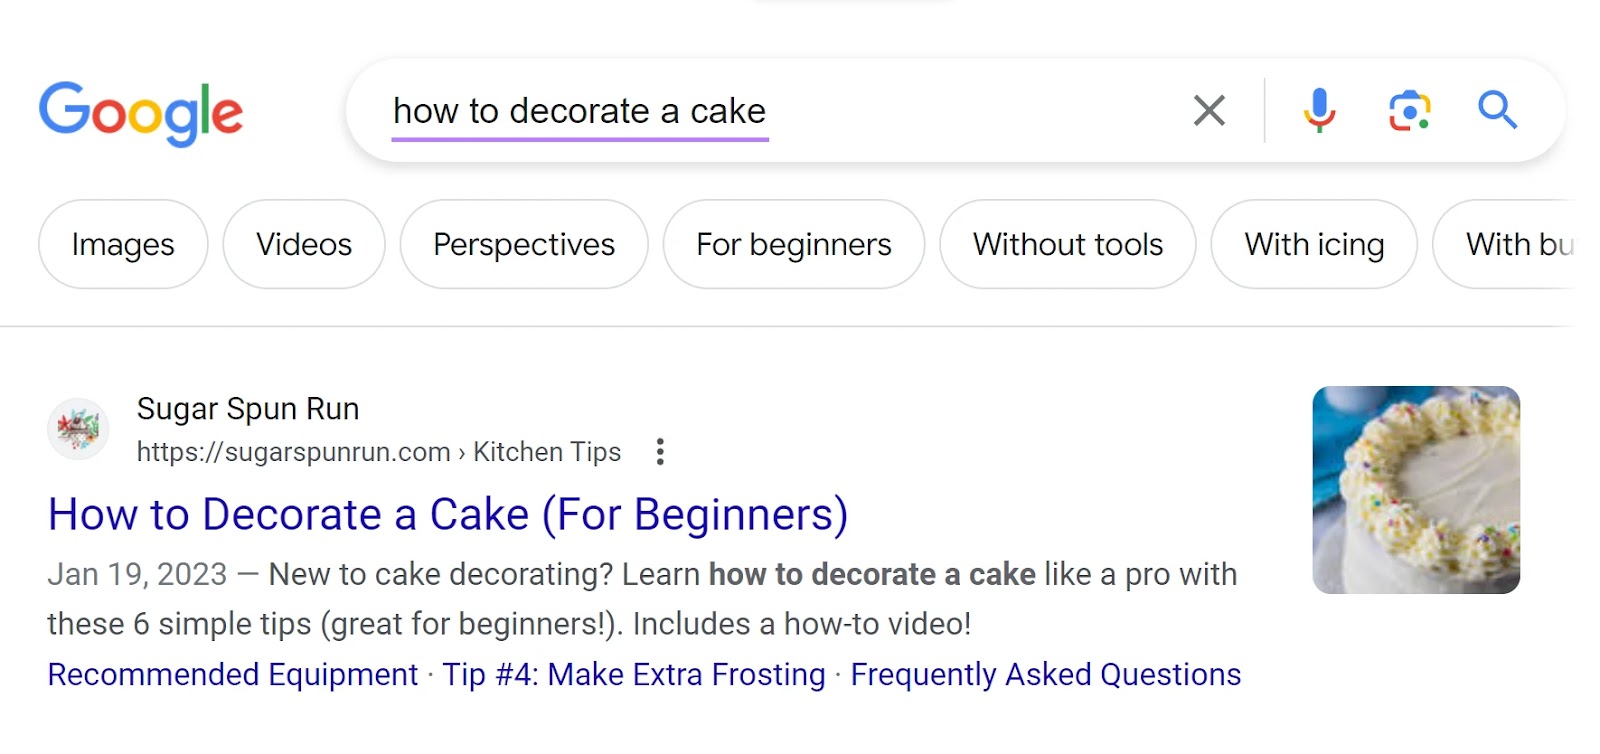 Top of Google's SERP effect   for "how to decorate a cake"